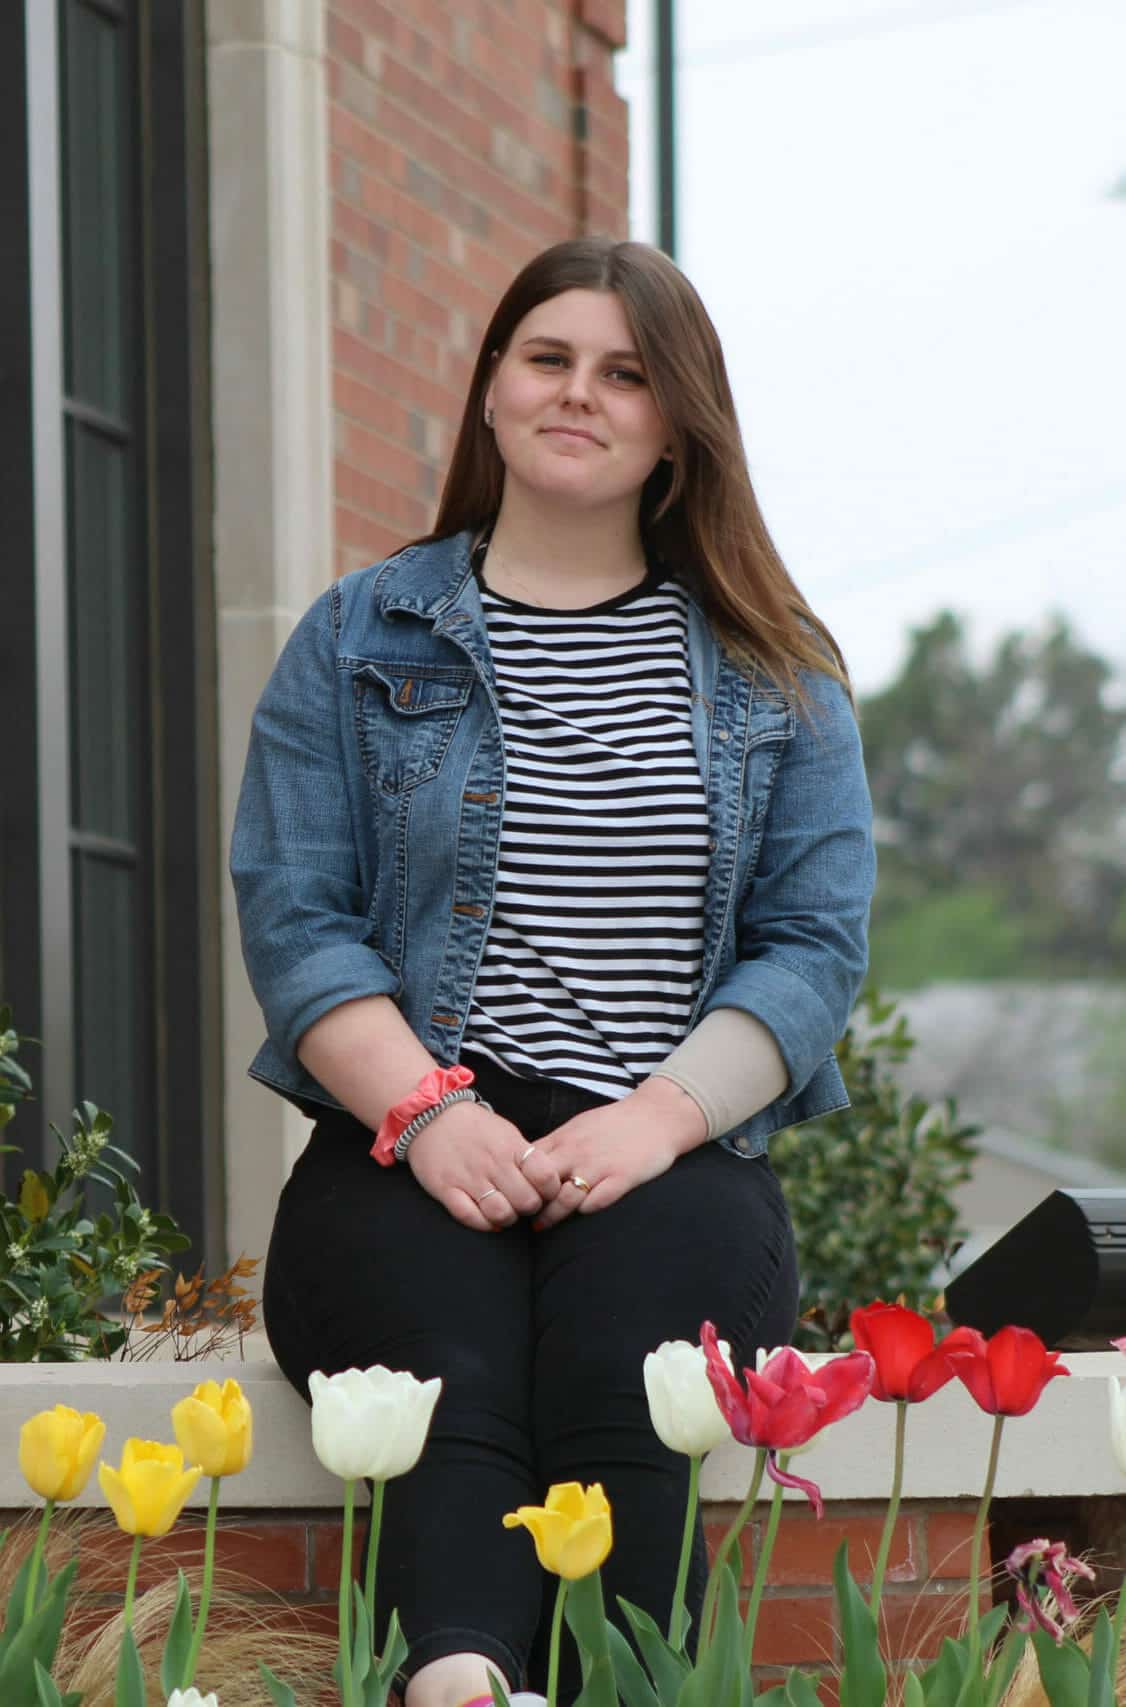 Dental Depots March EOM Cheyenne McArthur Sits Among Tulips